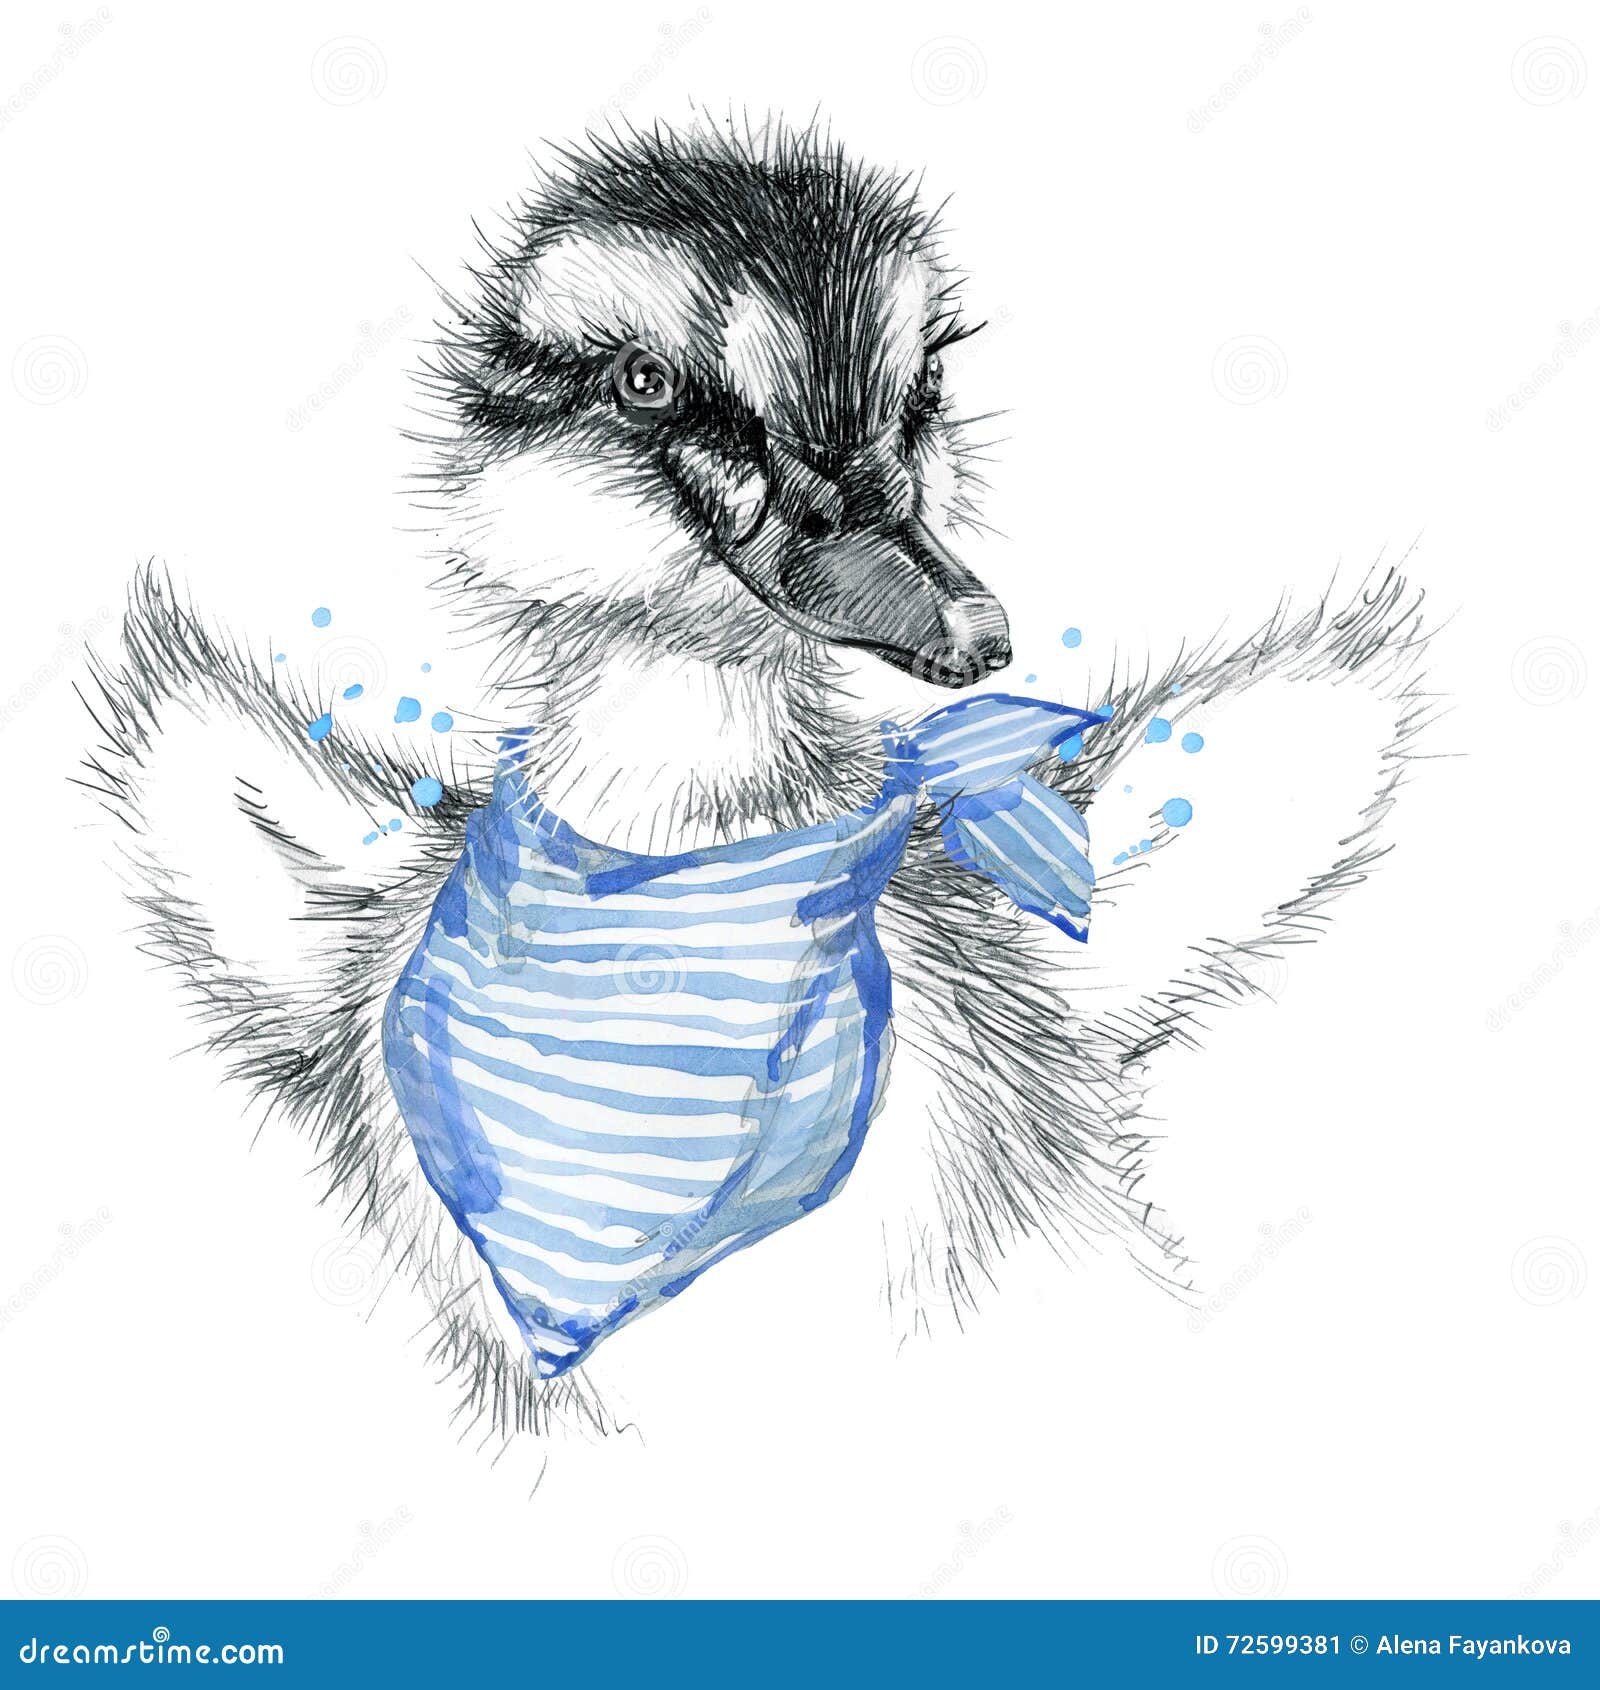 22180 Colored Drawing Duck Images Stock Photos  Vectors  Shutterstock